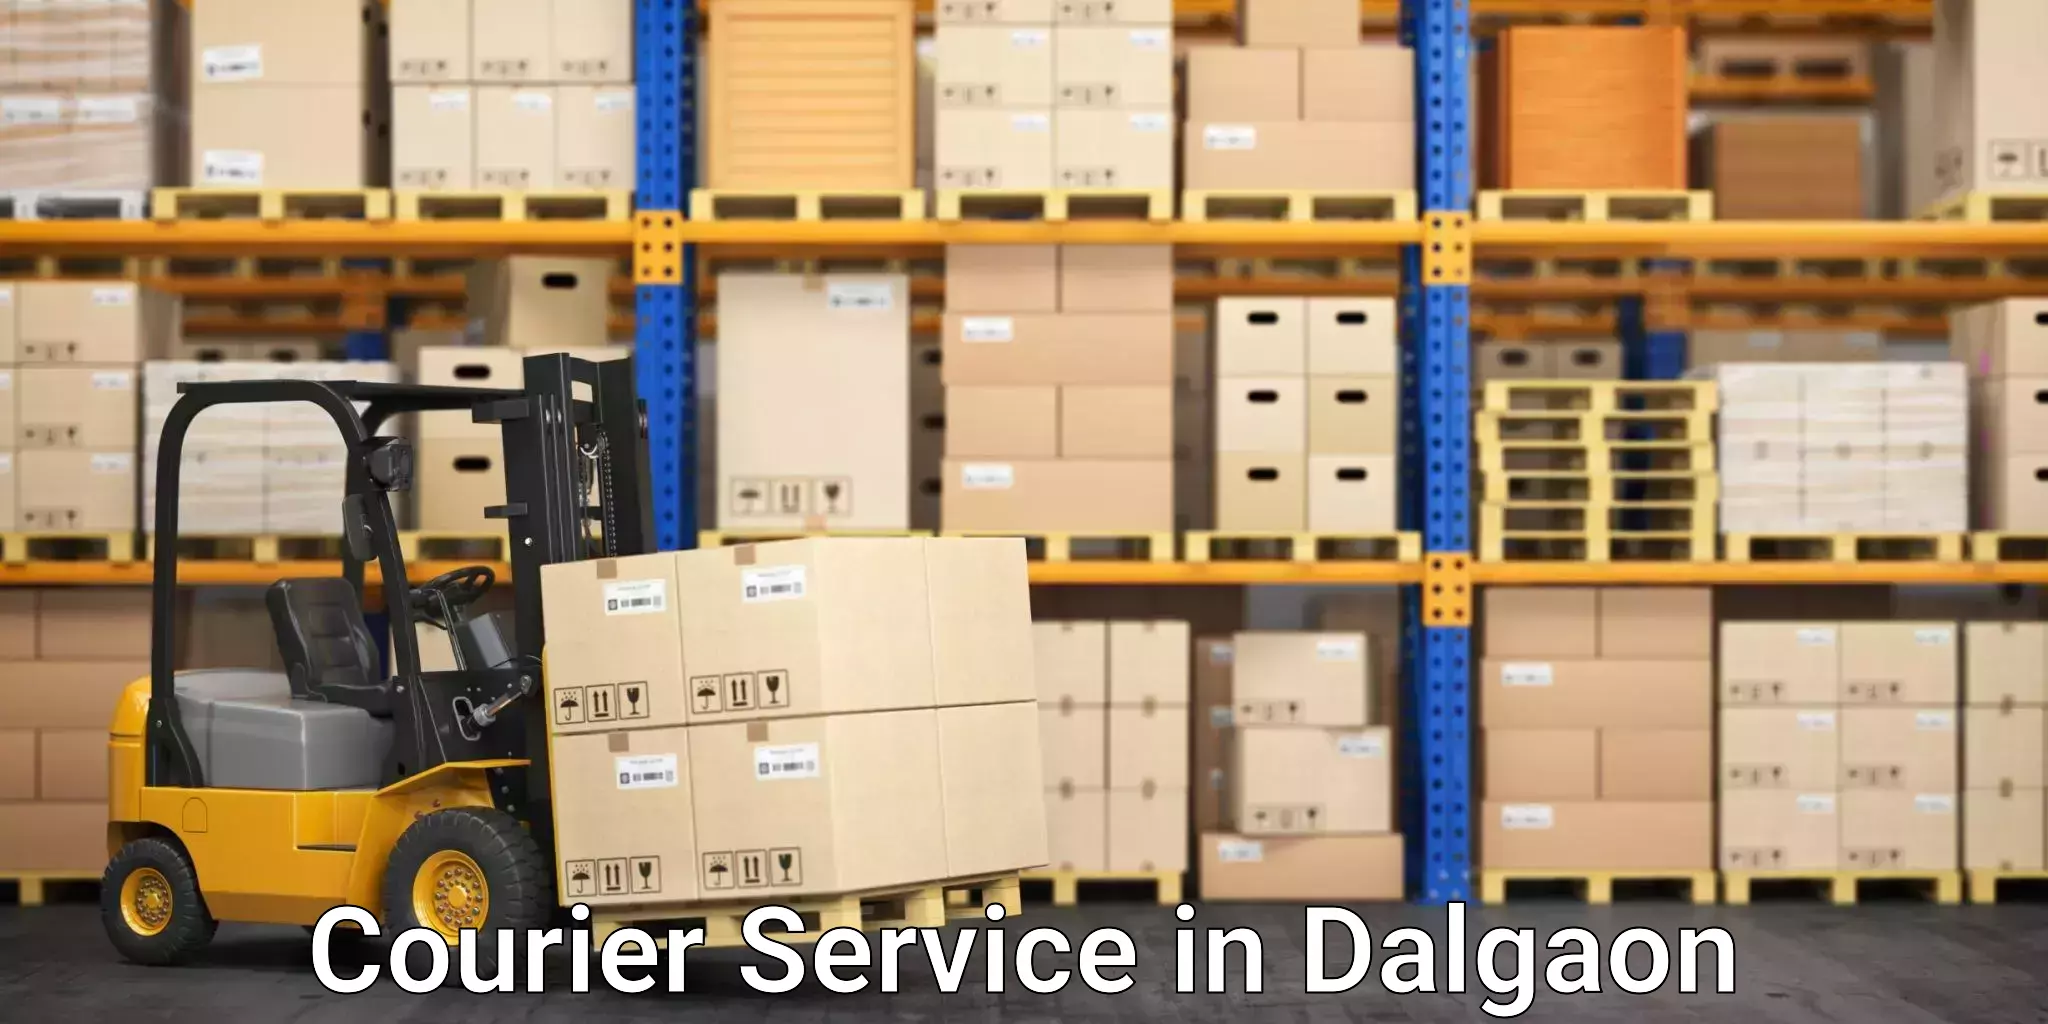 Express mail solutions in Dalgaon